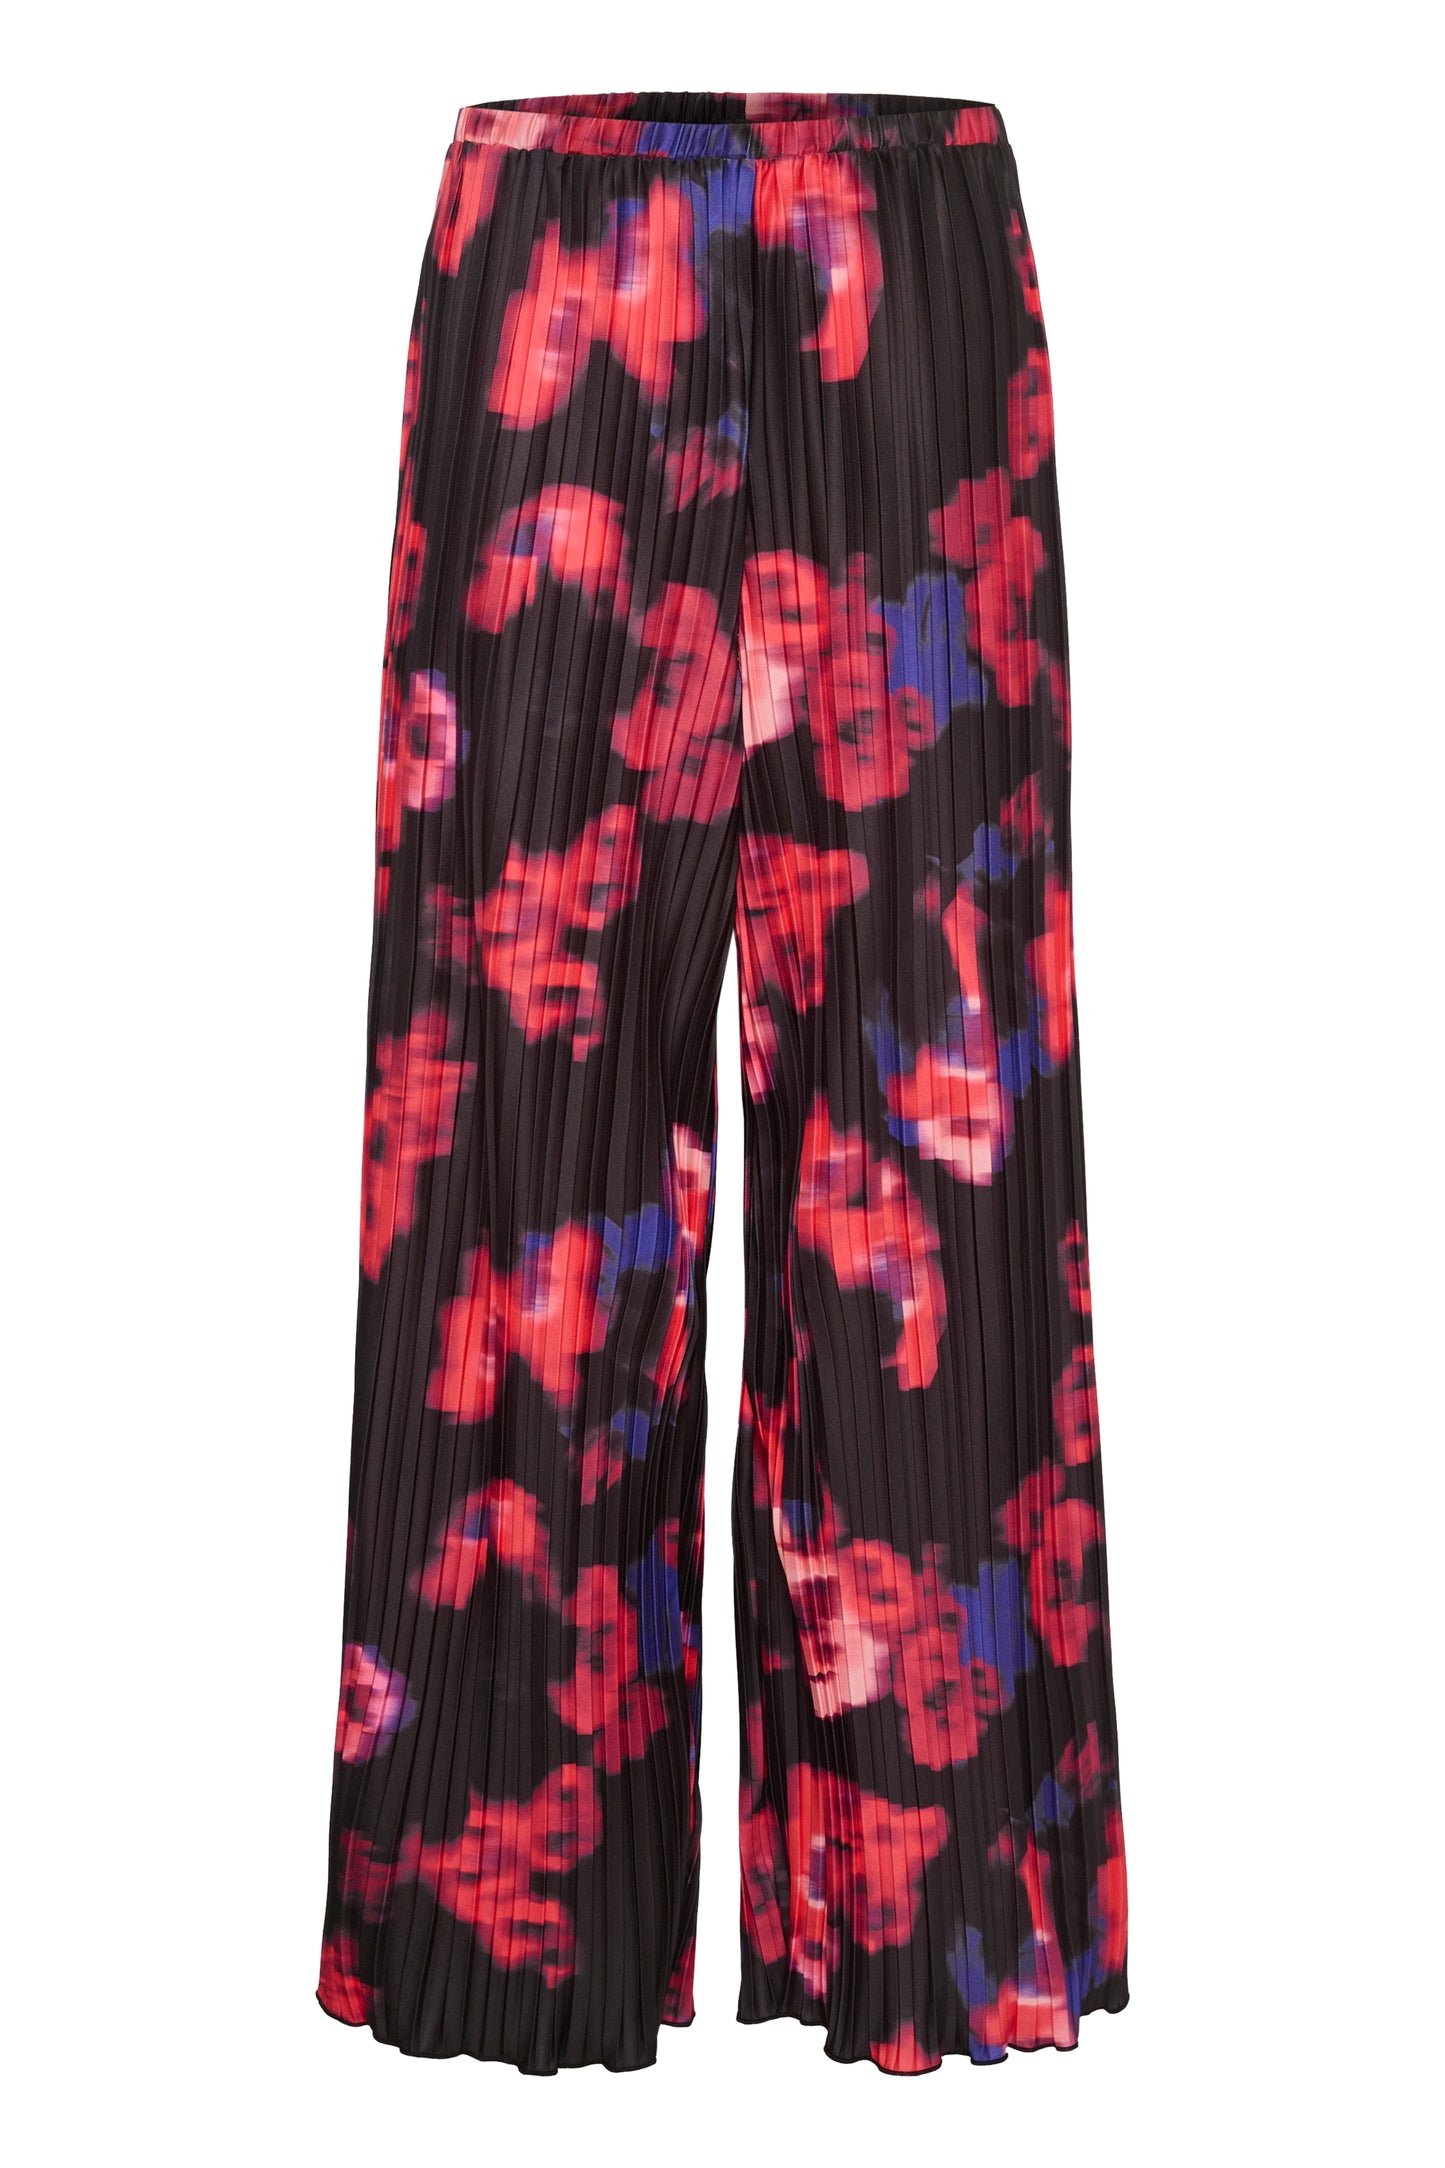 Soaked in Luxury Alice Pants Trousers Red Blurred Flower Print